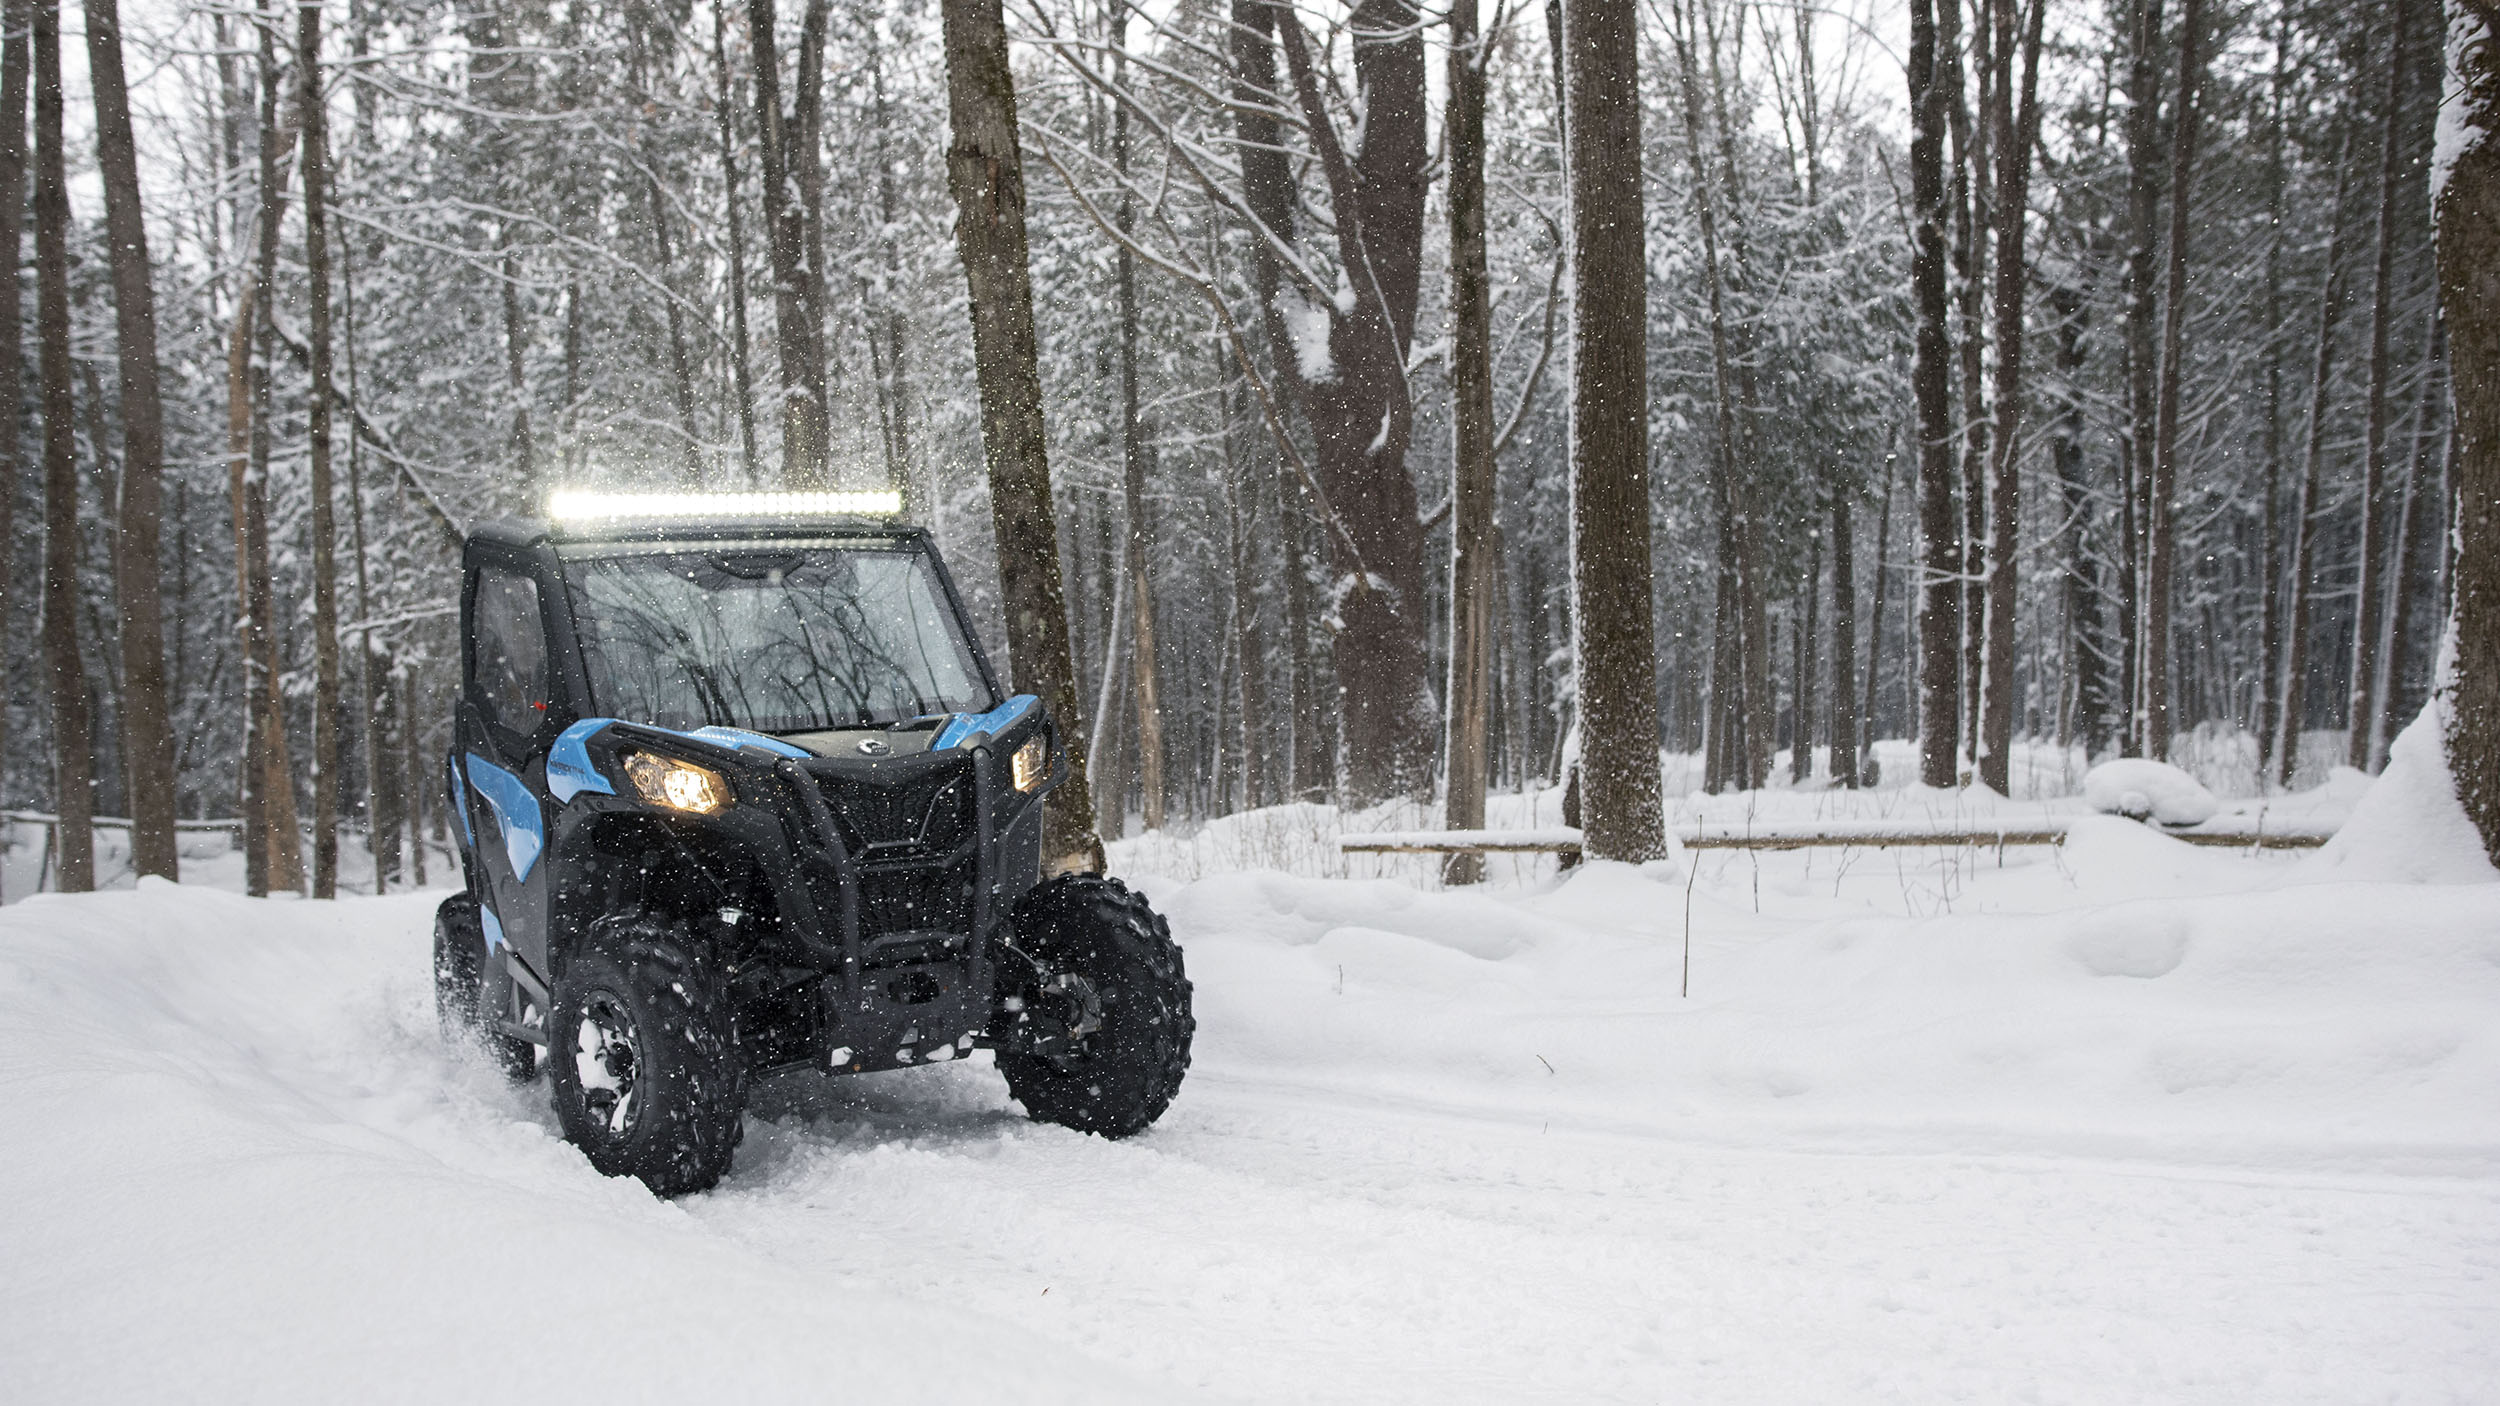 A Can-Am Maverick Trail turning in snow